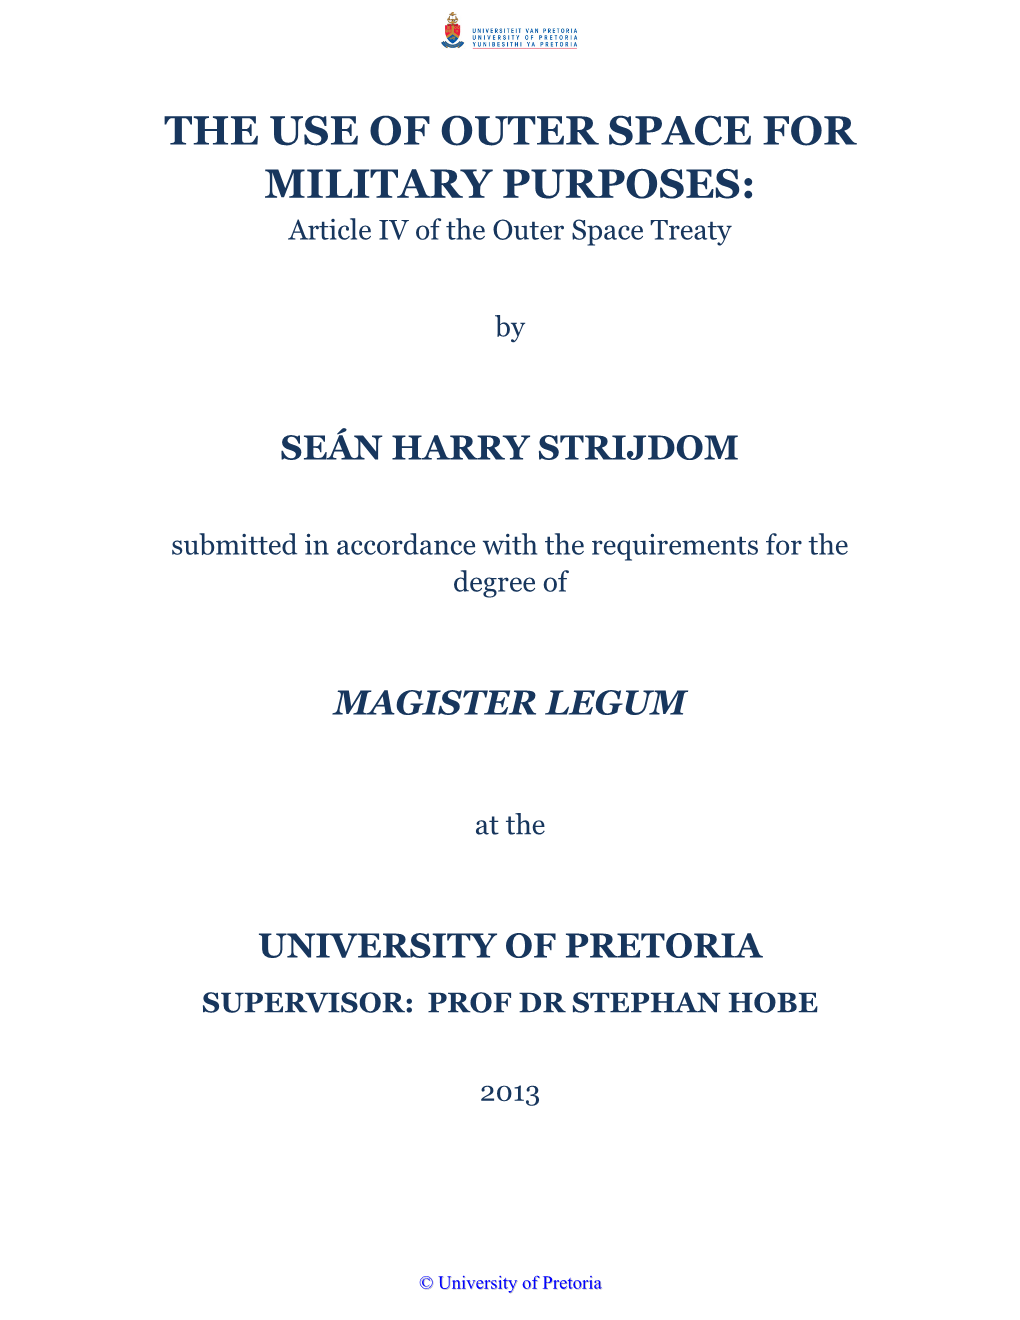 THE USE of OUTER SPACE for MILITARY PURPOSES: Article IV of the Outer Space Treaty